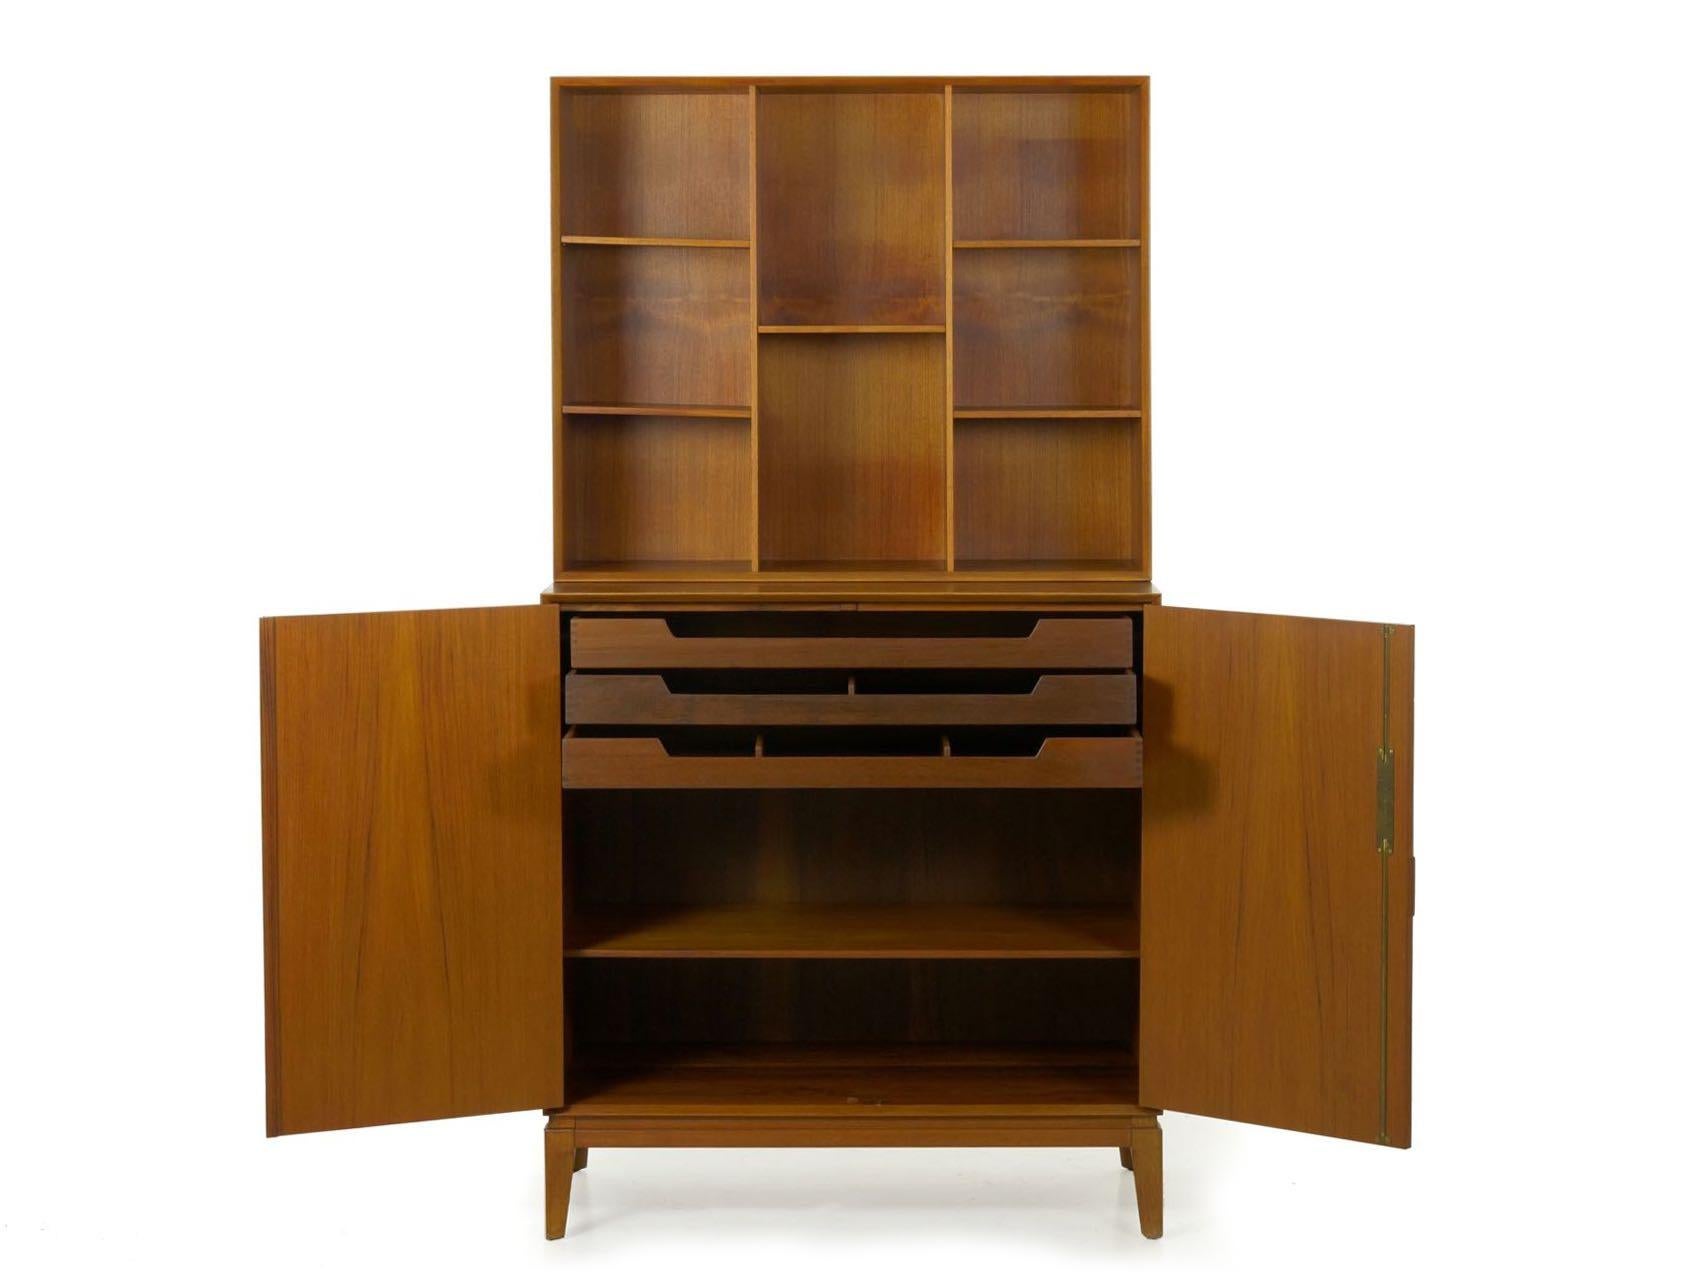 With the exposed finger-joinery and the distinctive sculpted teak pulls signature to Peter Hvidt and Orla Mølgaard Nielsen’s designs, this two-part bookcase-over-cabinet is a powerful strikepoint piece that perfectly balances form and function. It